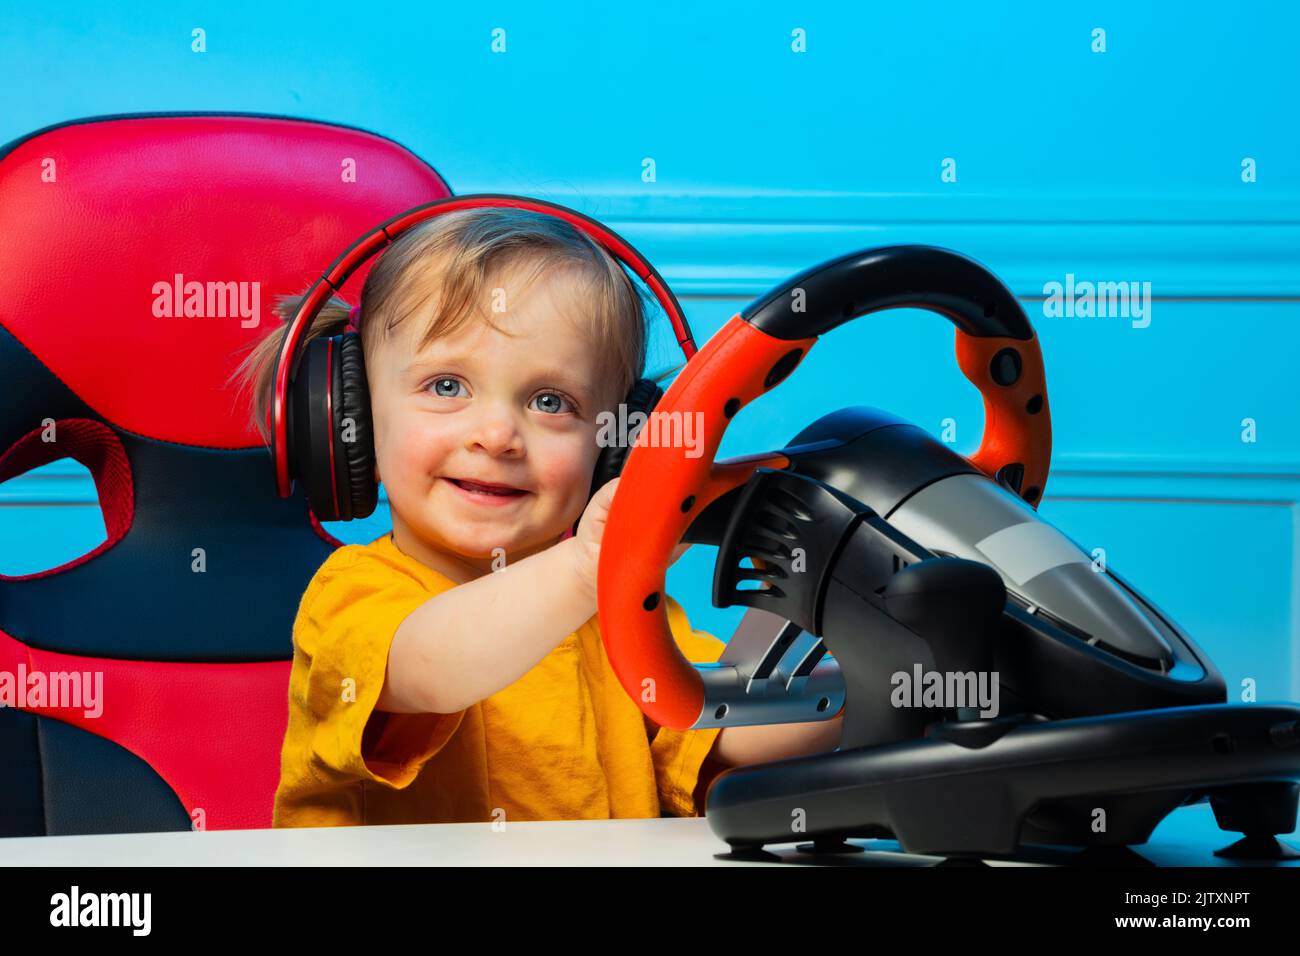 Little girl in headphones with steering wheel play race game Stock Photo